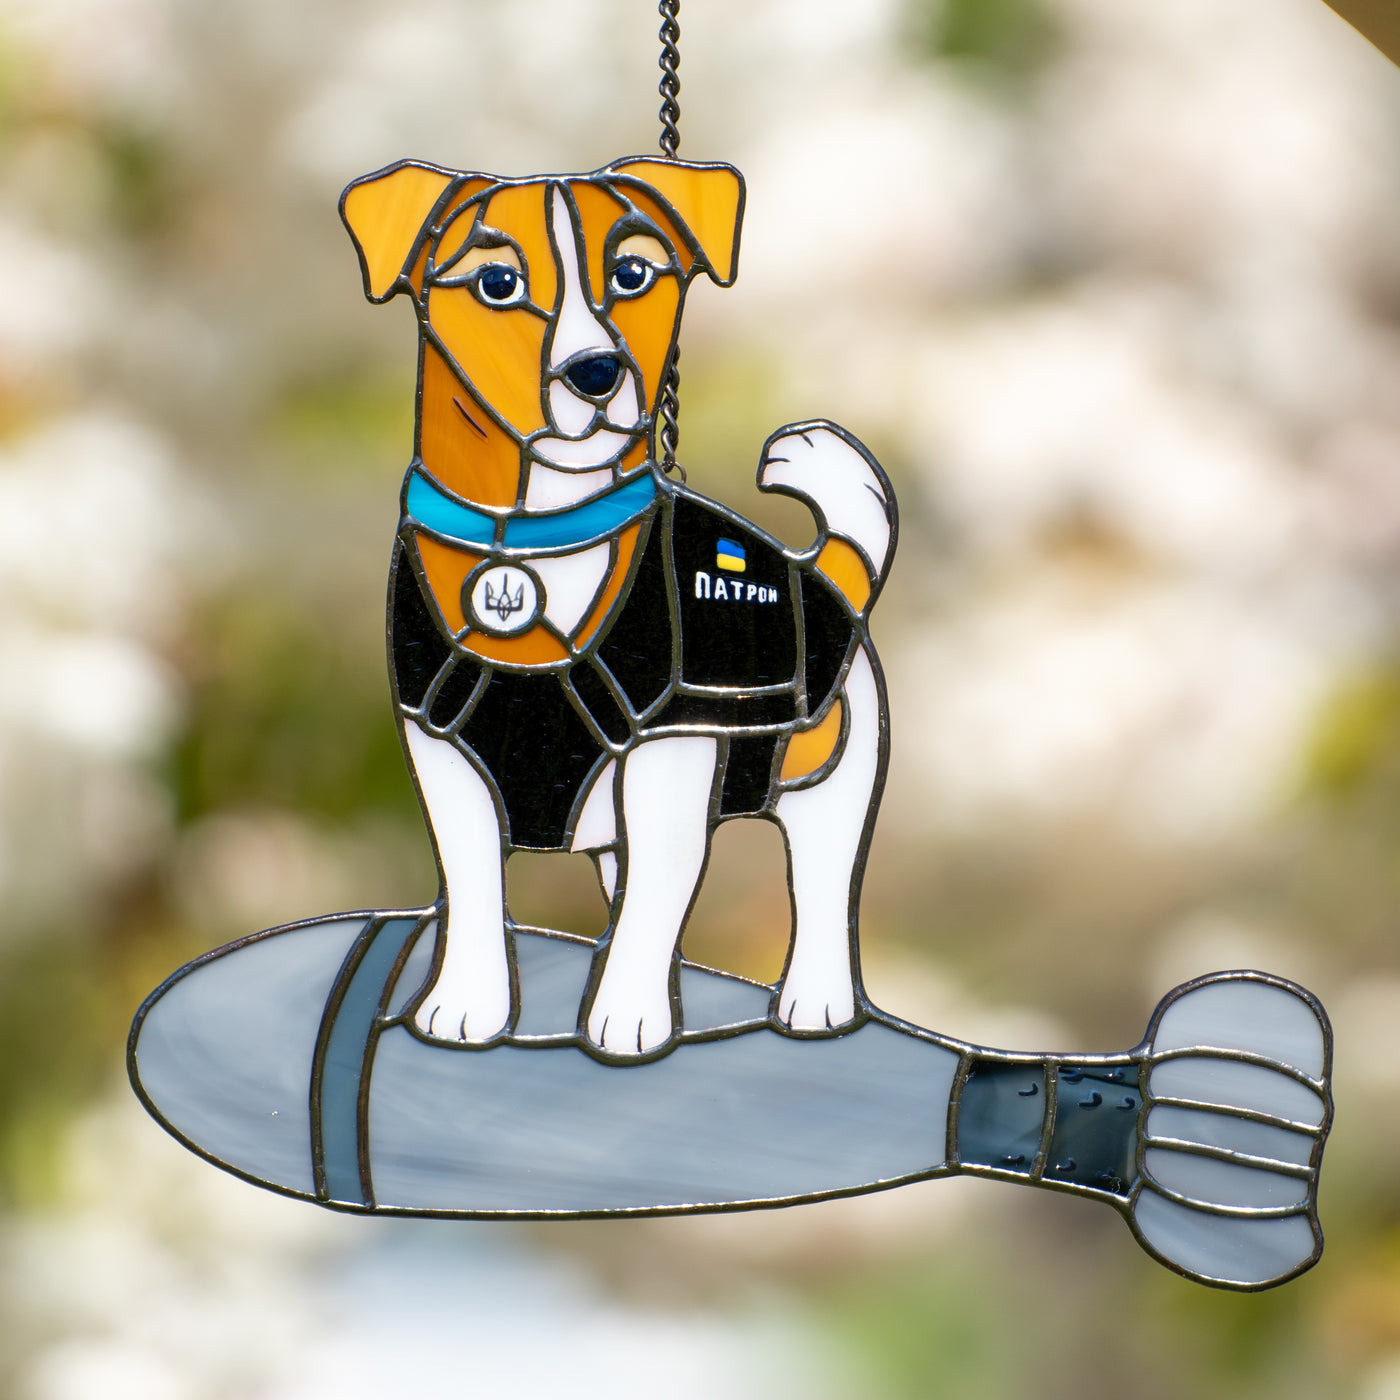 Stained glass Ukrainian service dog Patron standing on the bomb window hanging